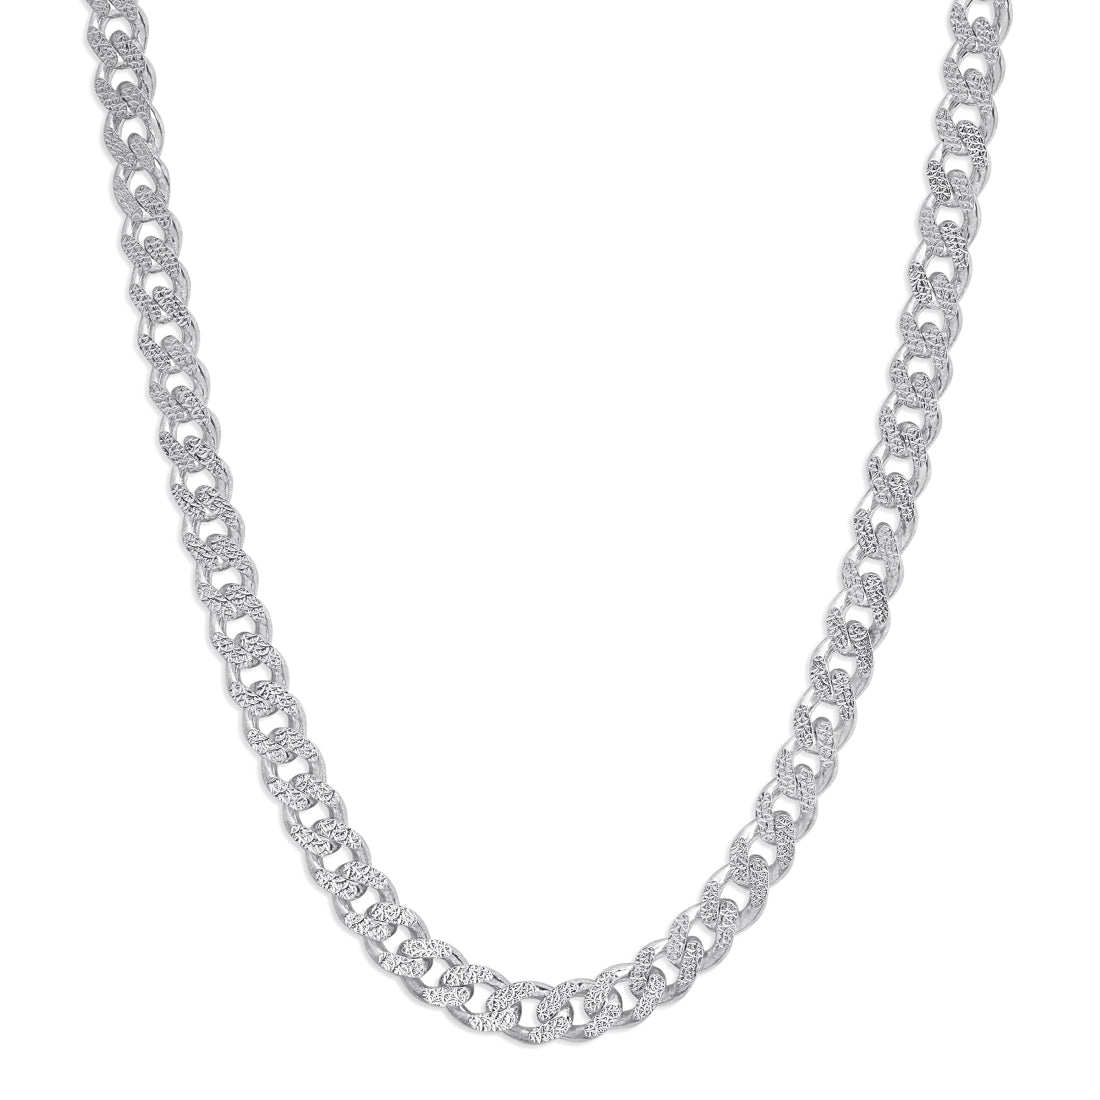 Masculine Links Rhodium Plated 925 Sterling Silver Men's Chain